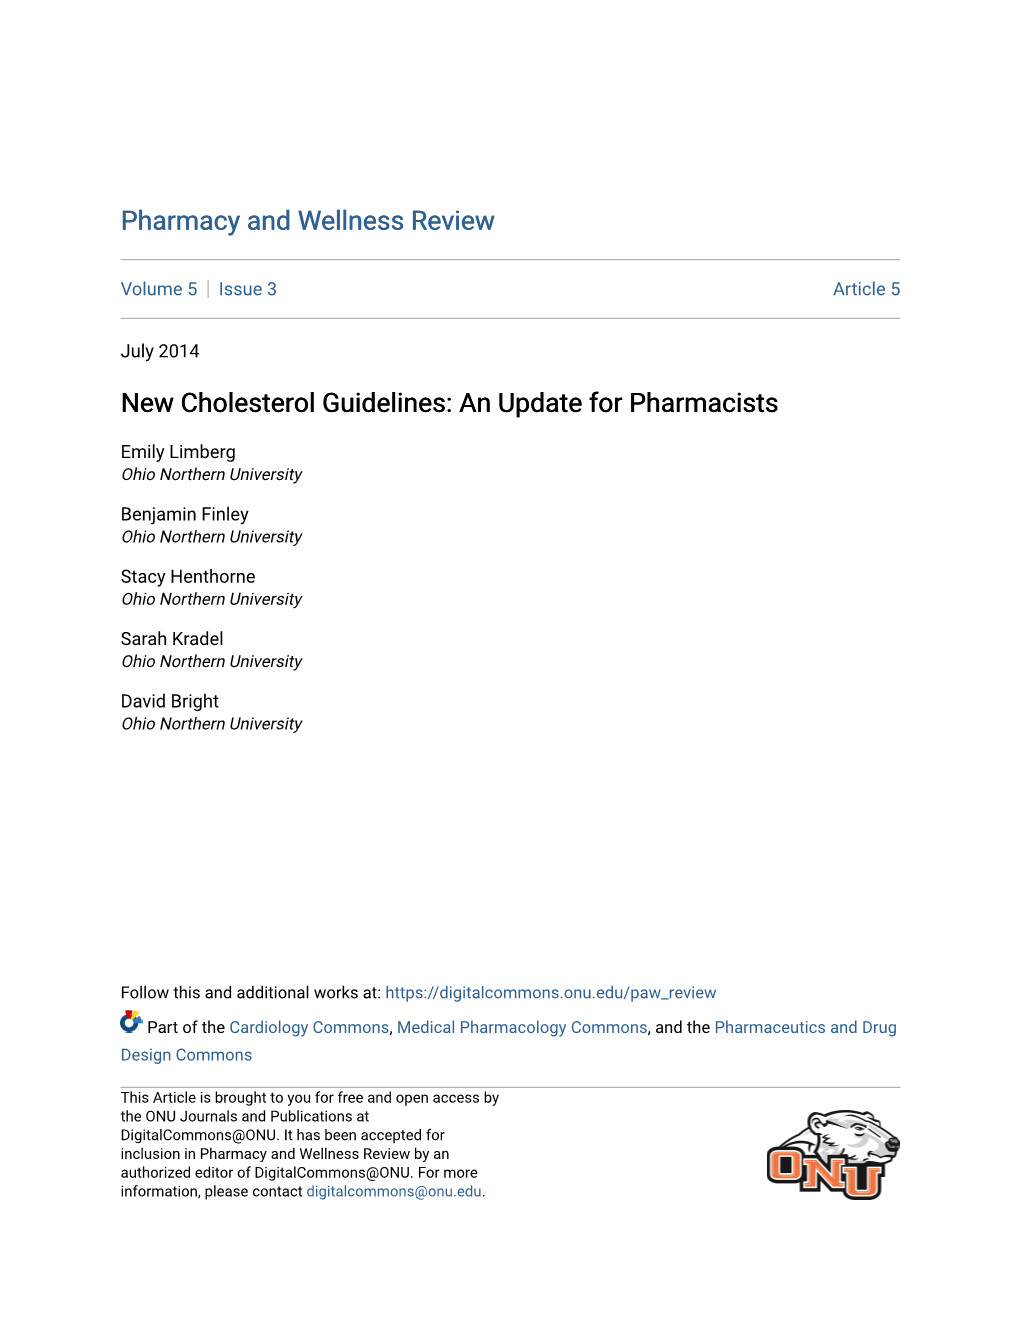 New Cholesterol Guidelines: an Update for Pharmacists